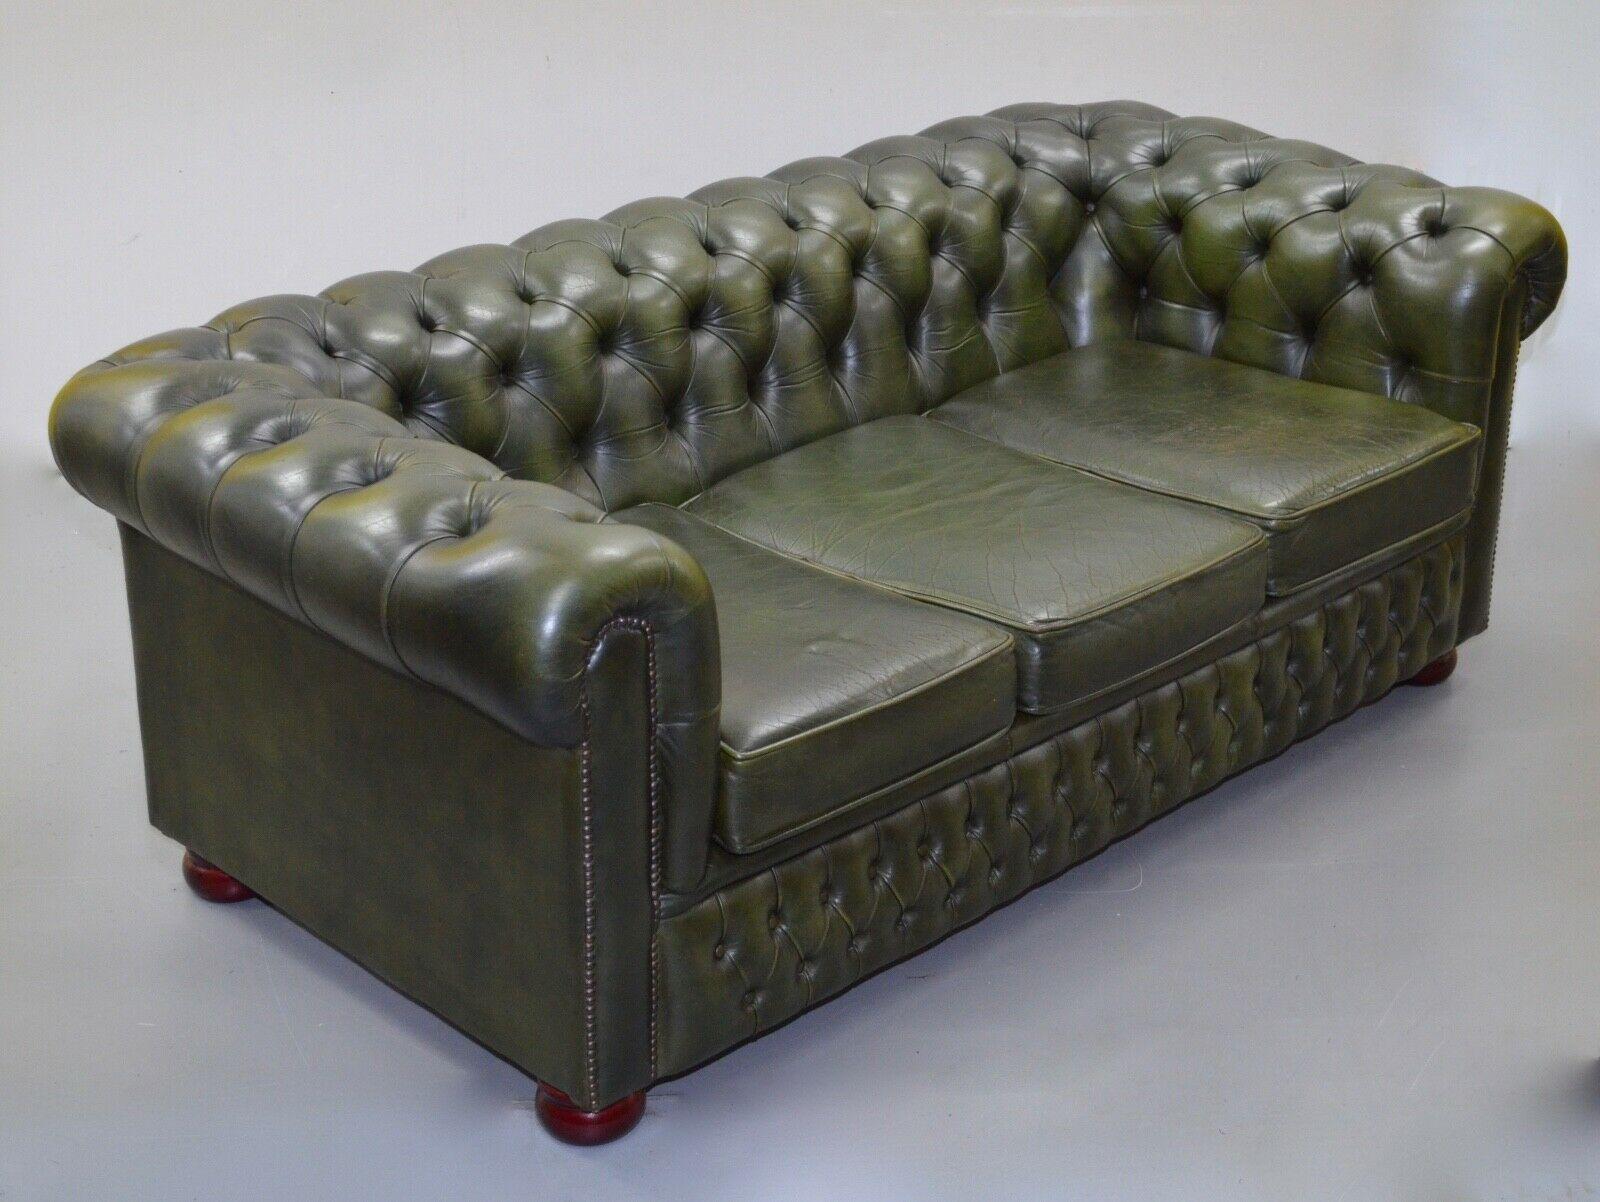 We are delighted to offer for sale this luxury classic olive green leather Chesterfield 3-seater sofa. It has been hand made with deep buttoned arms and back with this rich green premium leather that has a beautiful patina.
As is standard with